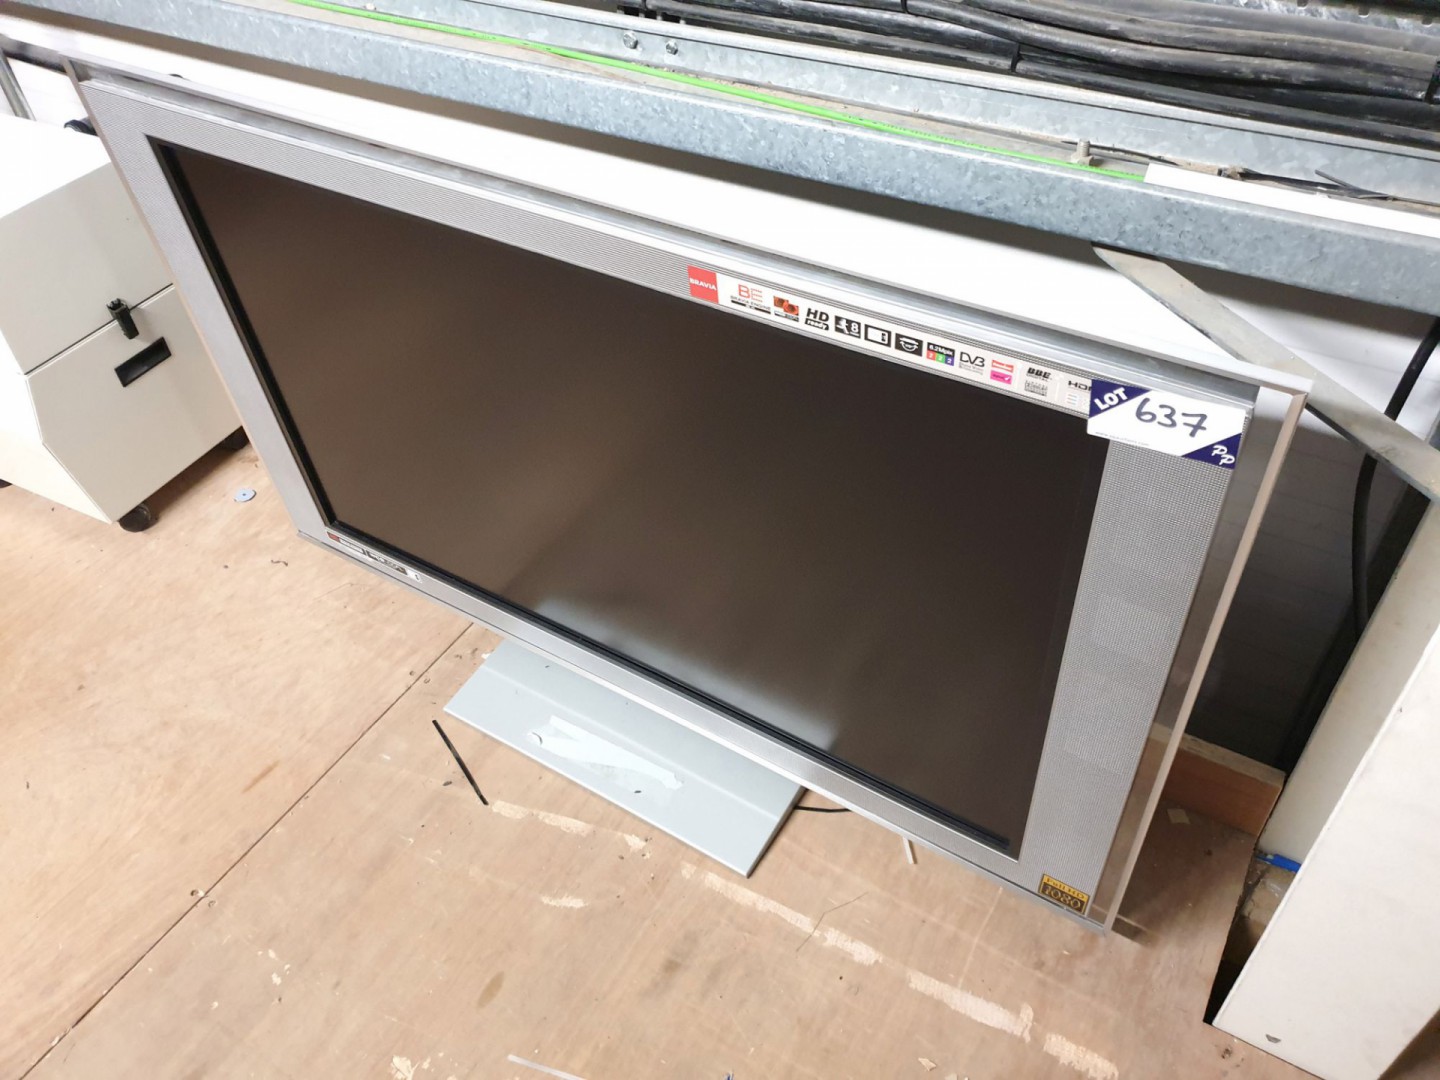 Sony KDL-46X2000 LCD TV on stand